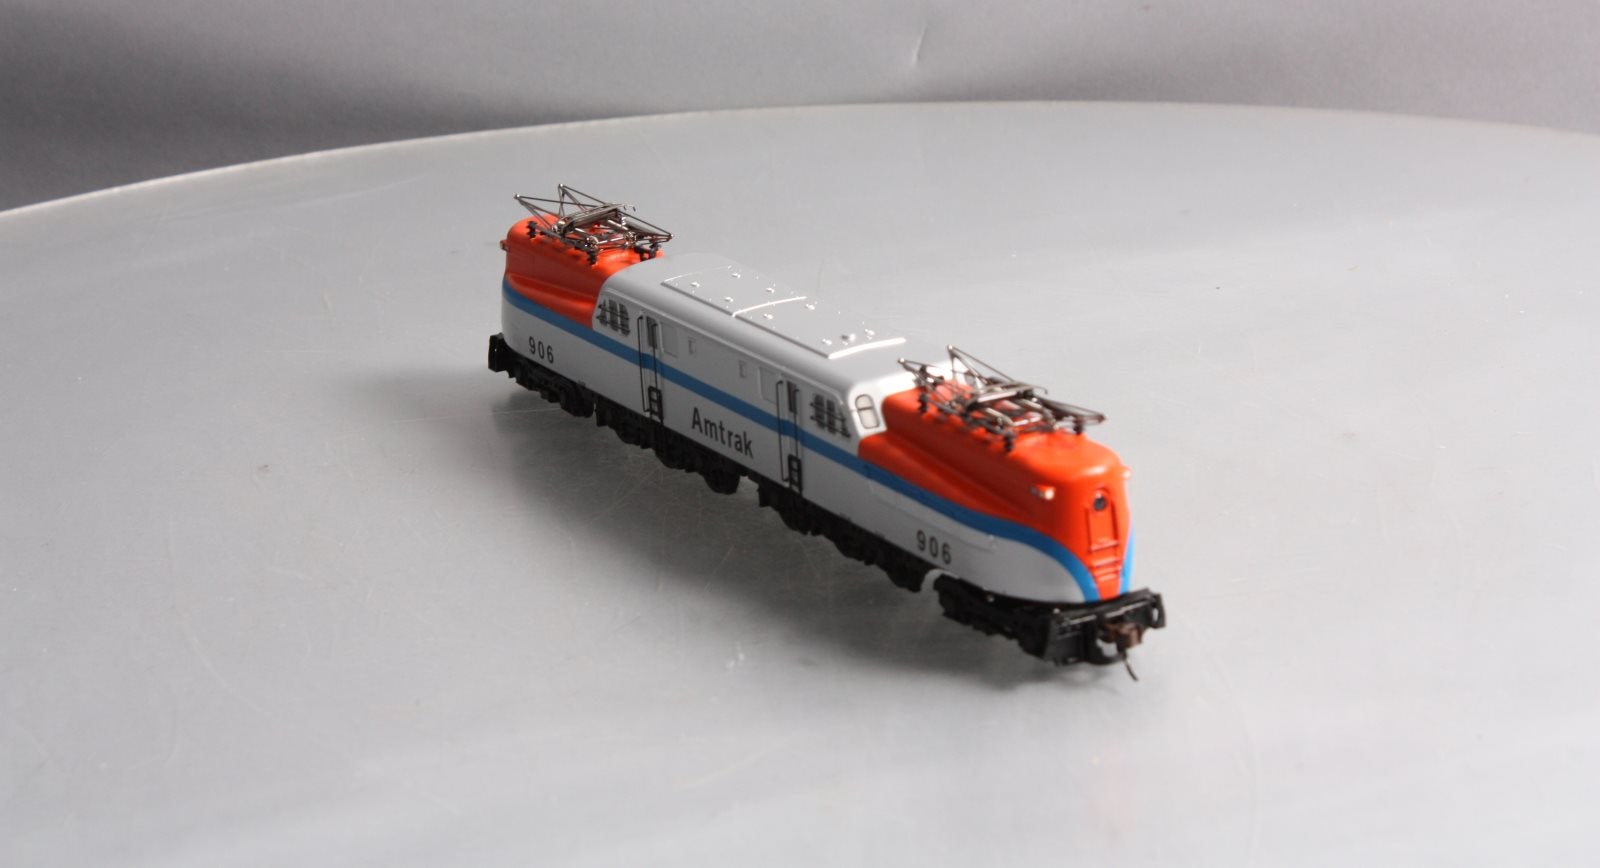 Bachmann 65306 HO Amtrak GG-1 Electric Locmotive with Sound and DCC #906